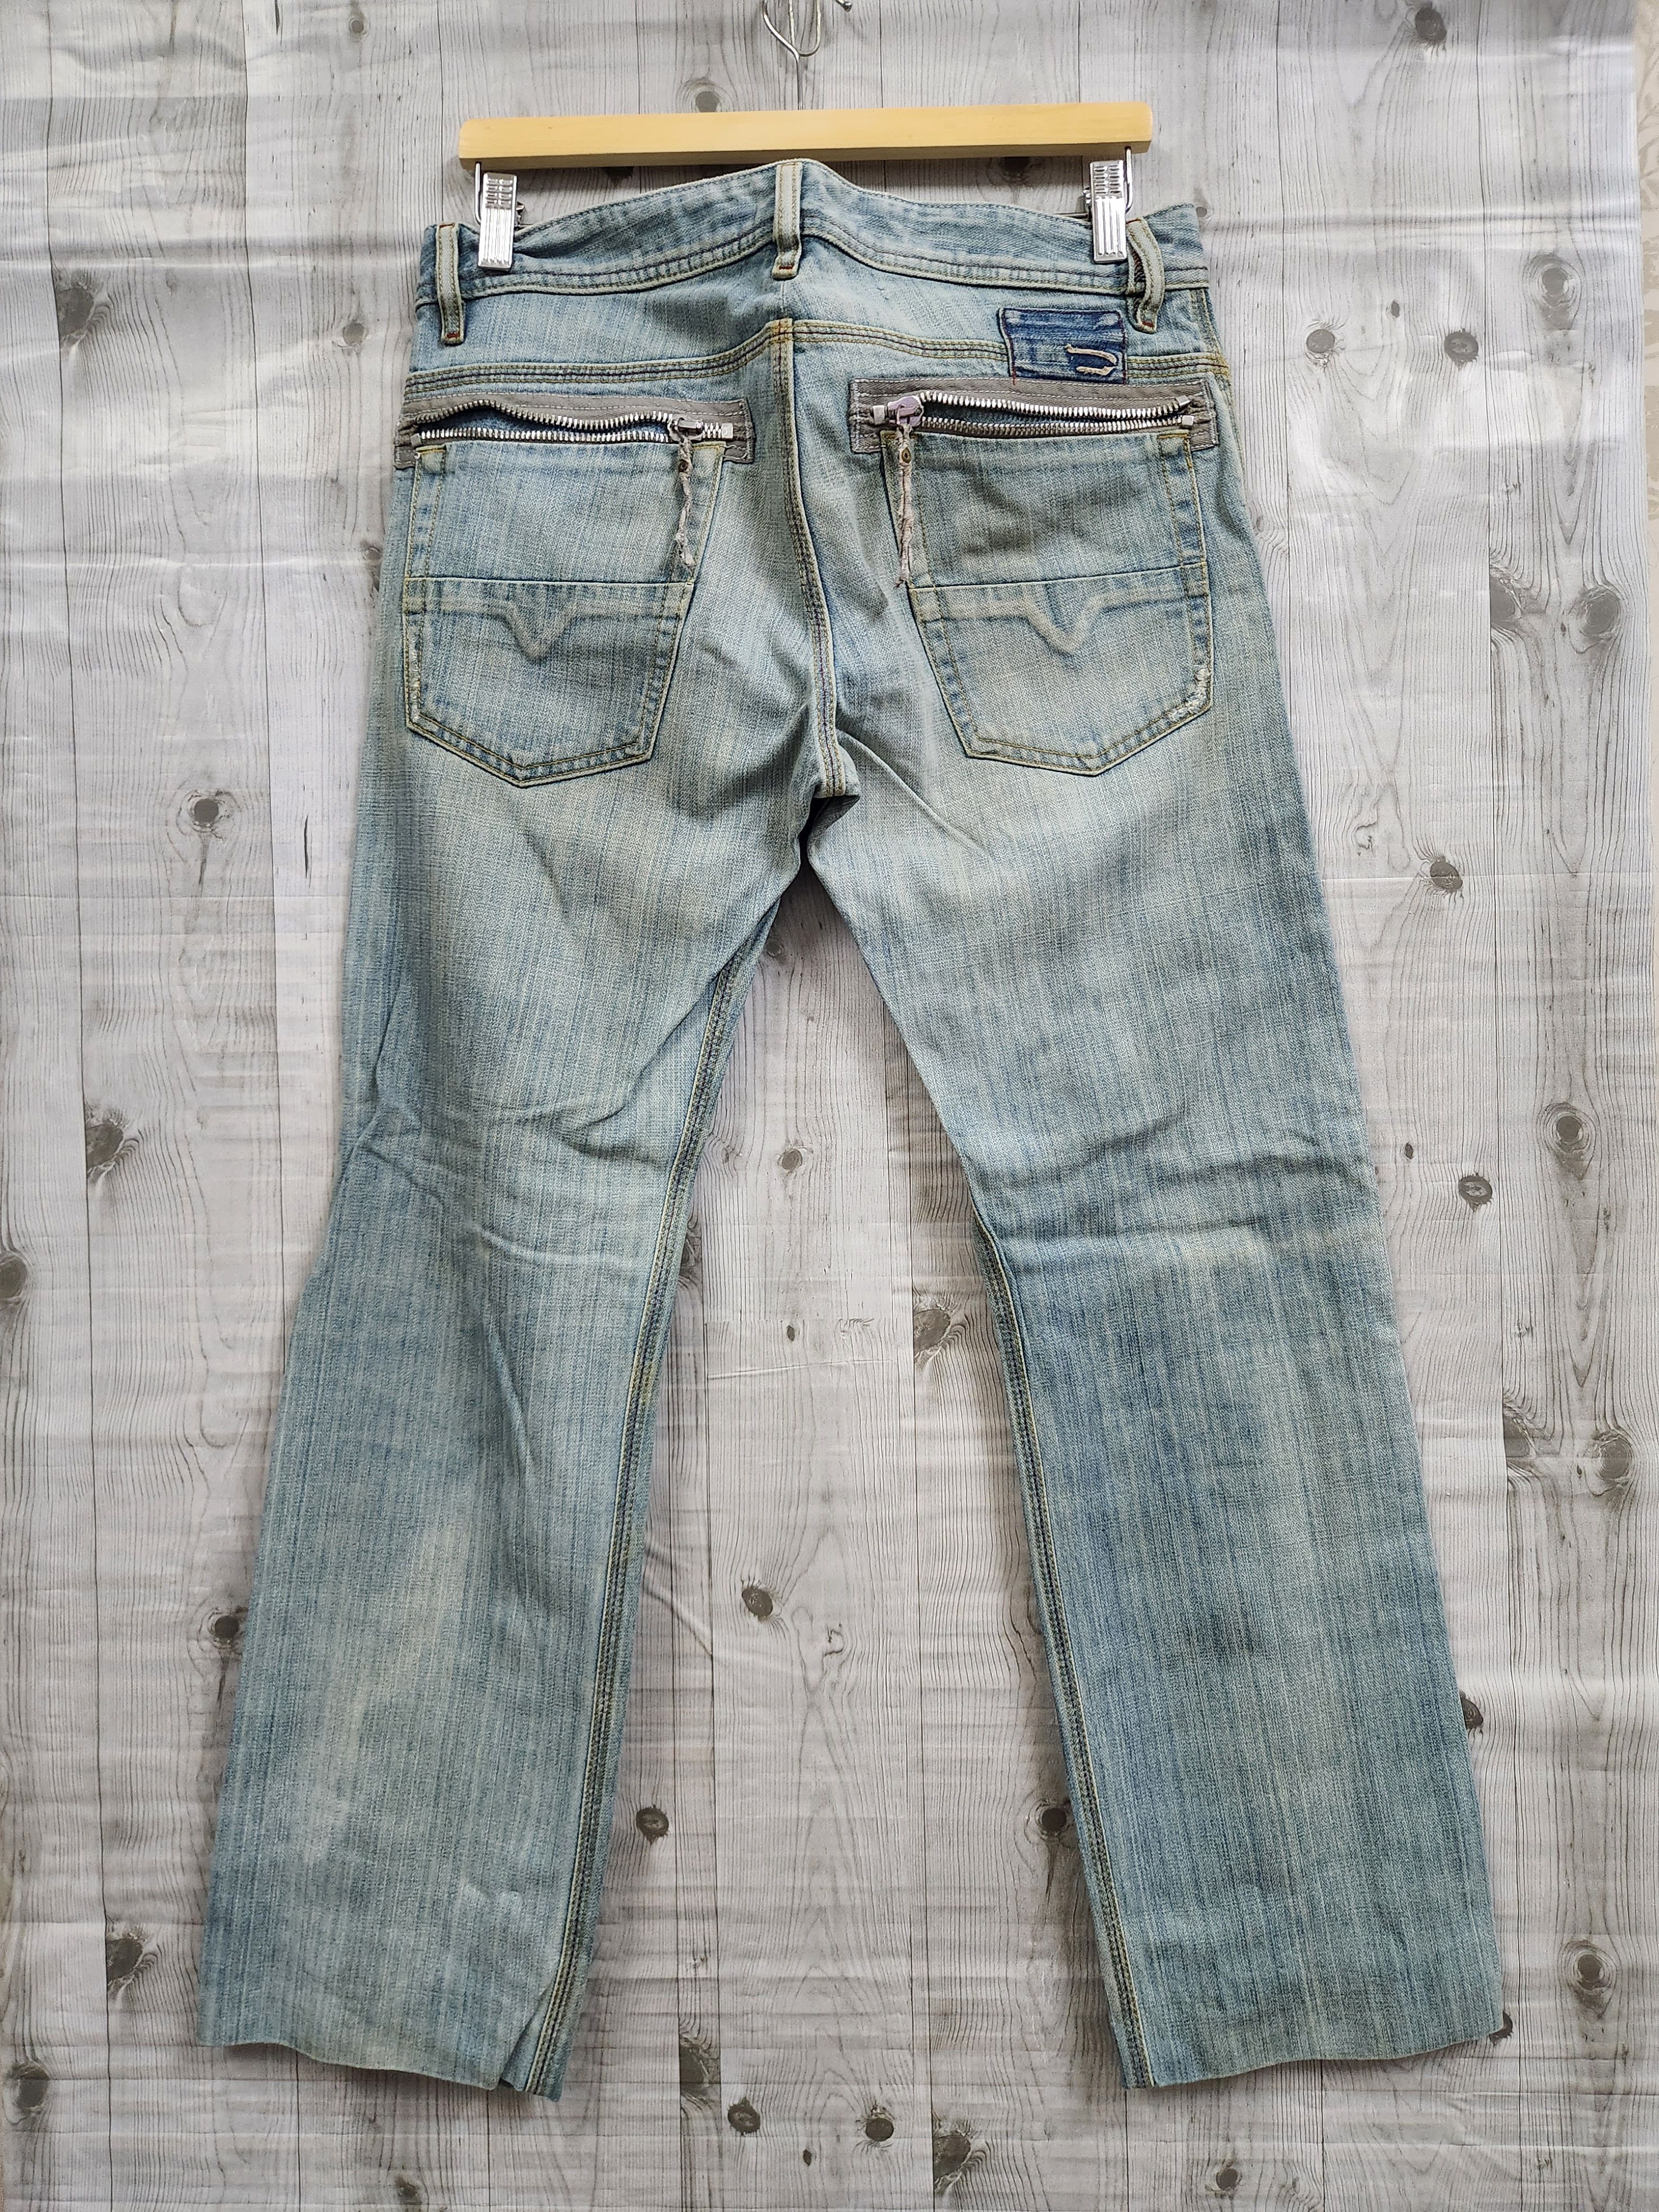 Mudwash Diesel Vintage Two Buttons Jeans Italy - 13